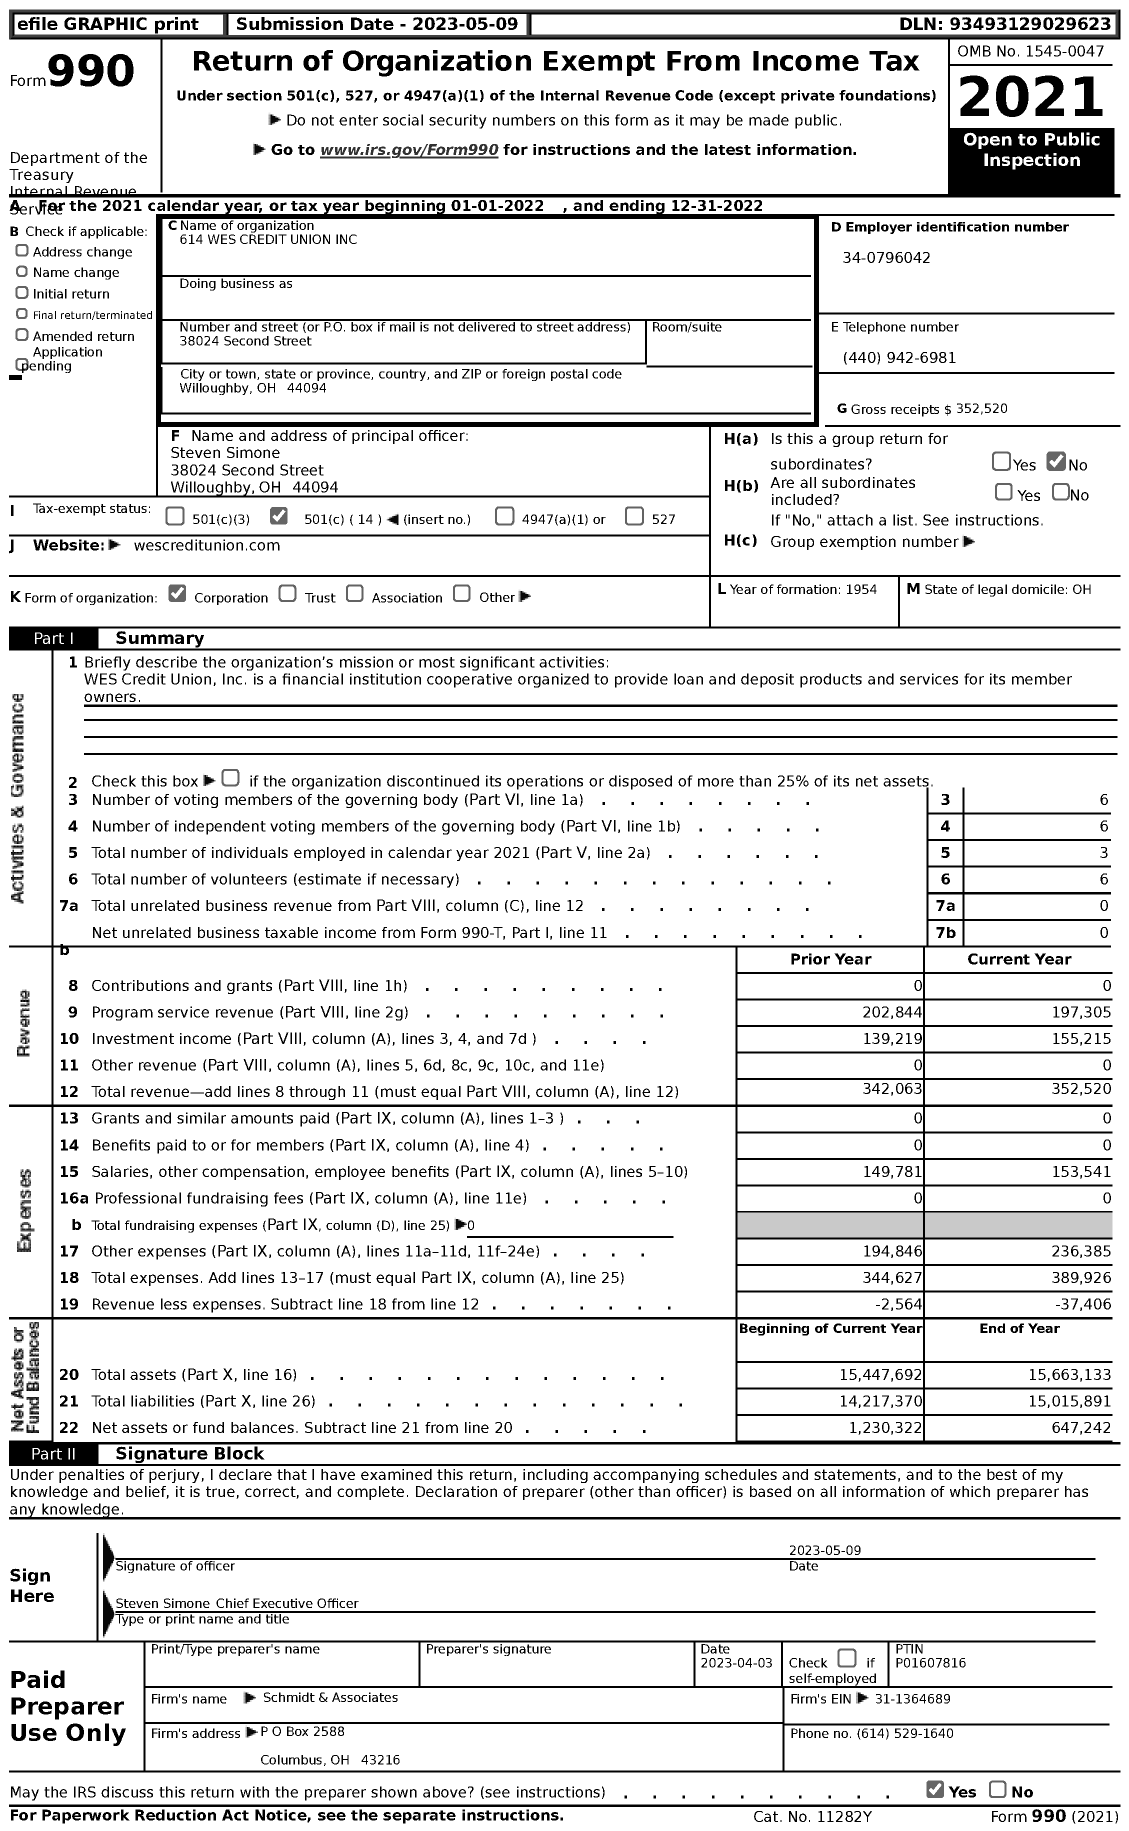 Image of first page of 2022 Form 990 for 614 WES Credit Union